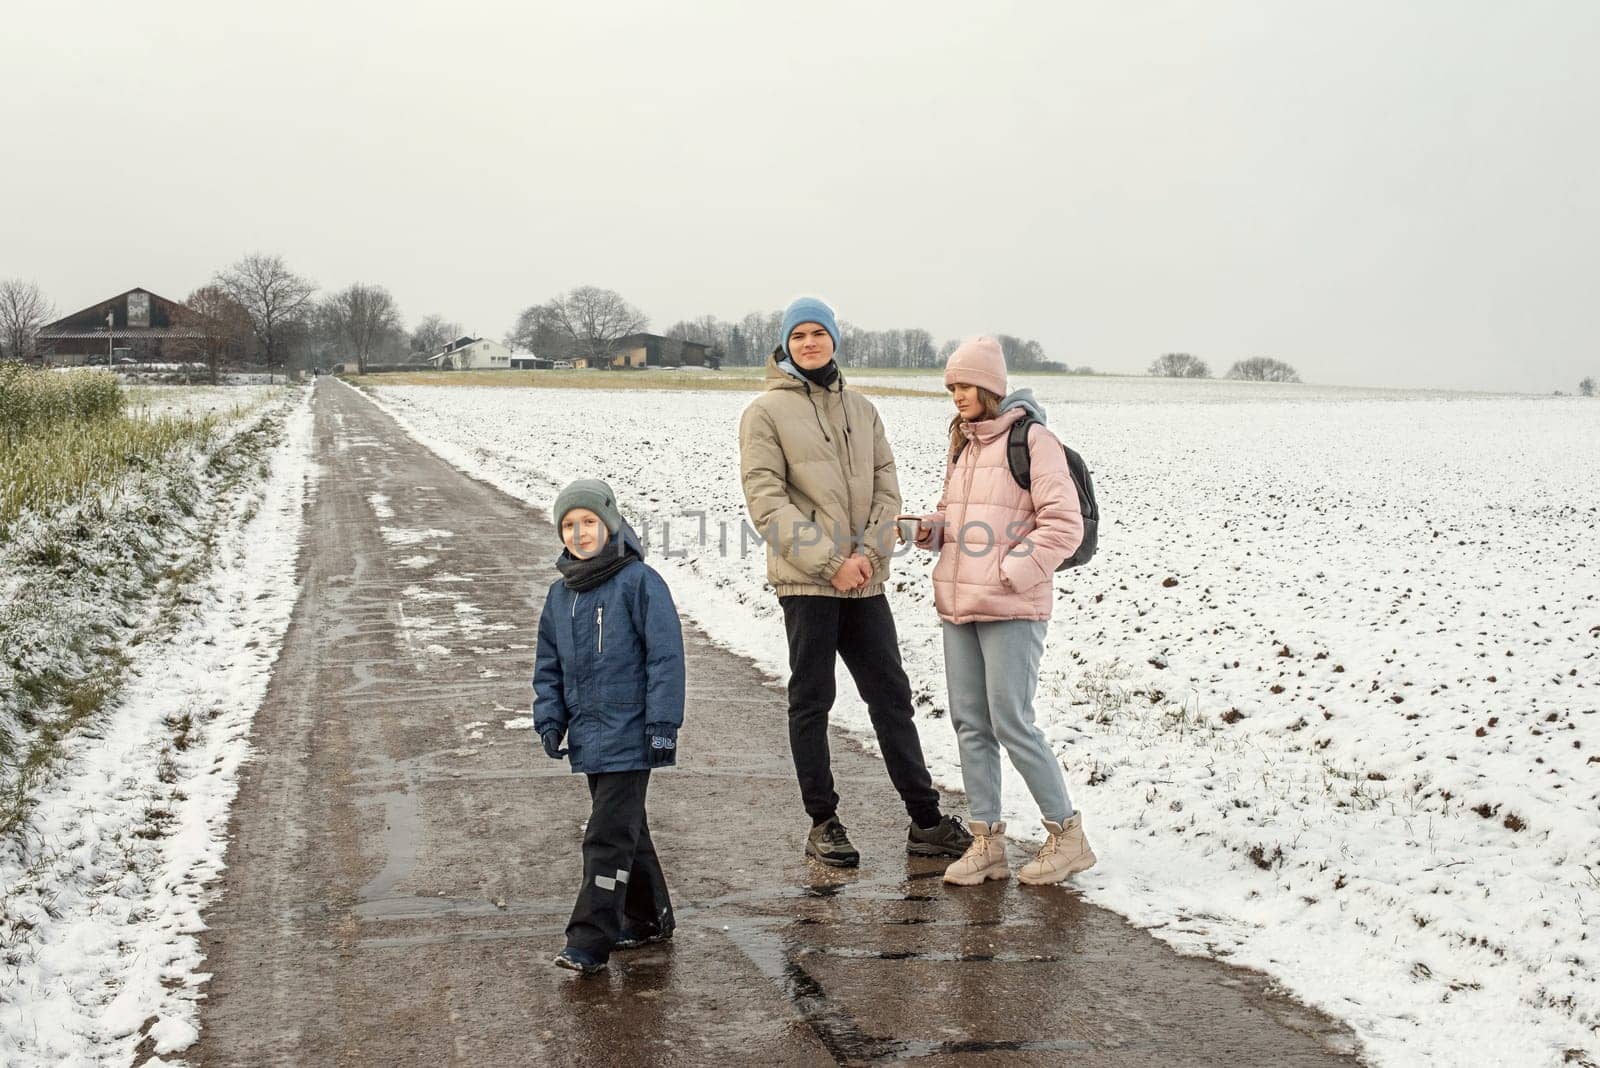 Winter Family Bliss: Mother and Two Sons Enjoying a Snowy Countryside Stroll. Winter, Snow, Mother, Two sons, Family, Rural road, Snow-covered field, Winter landscape by Andrii_Ko